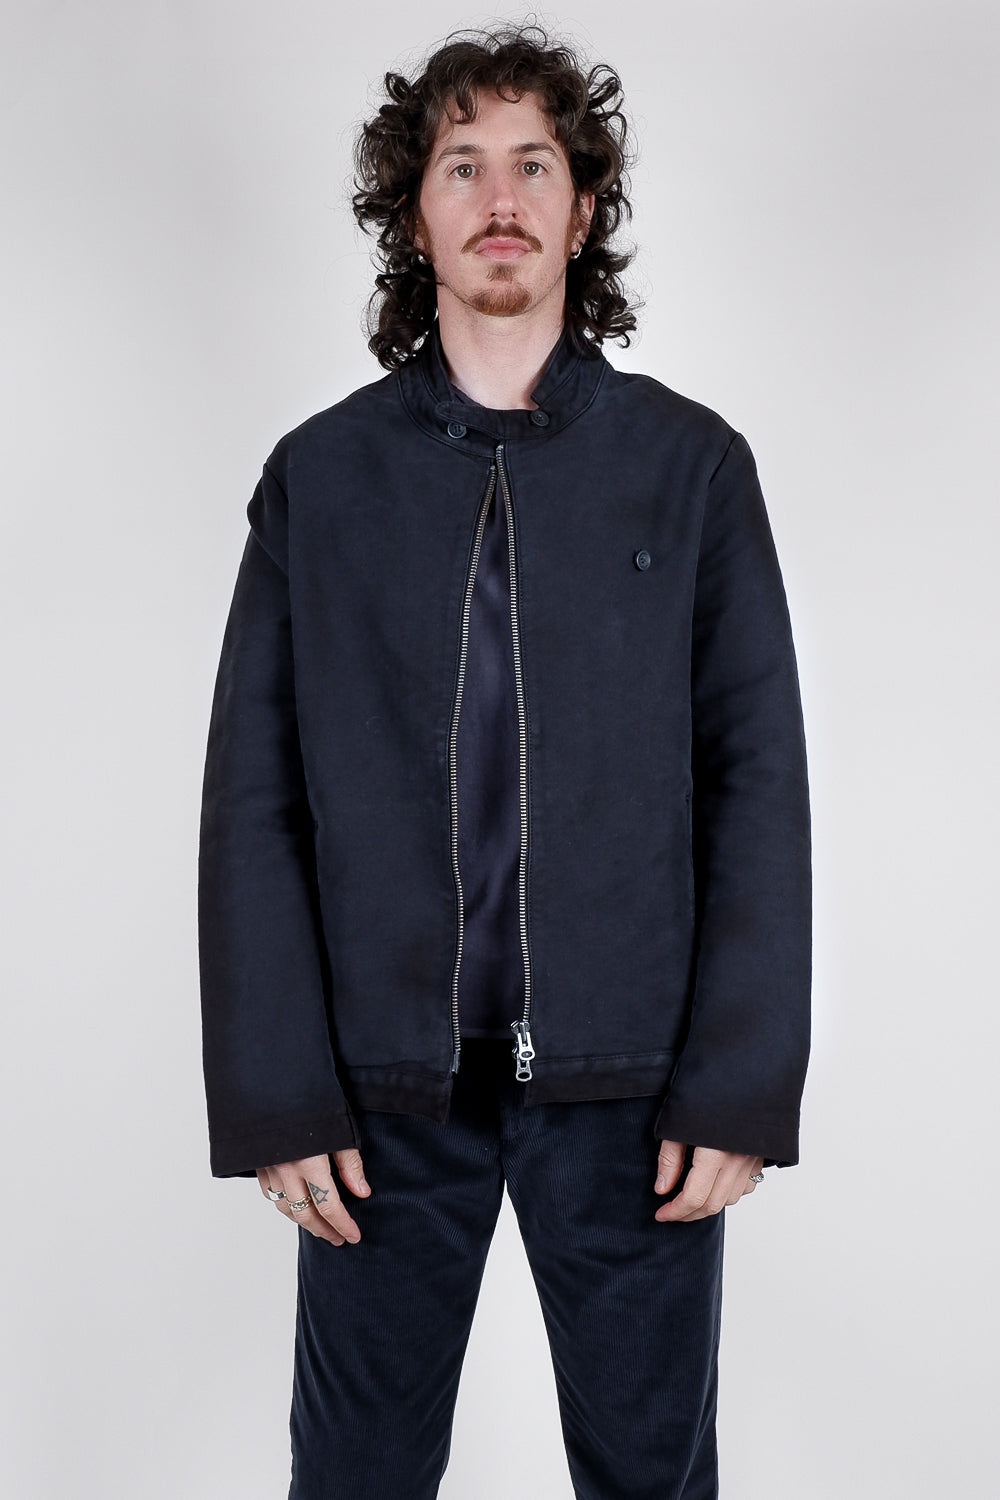 Buy the Hannes Roether Heavy Cotton Zip-Up Jacket Navy at Intro. Spend £50 for free UK delivery. Official stockists. We ship worldwide.